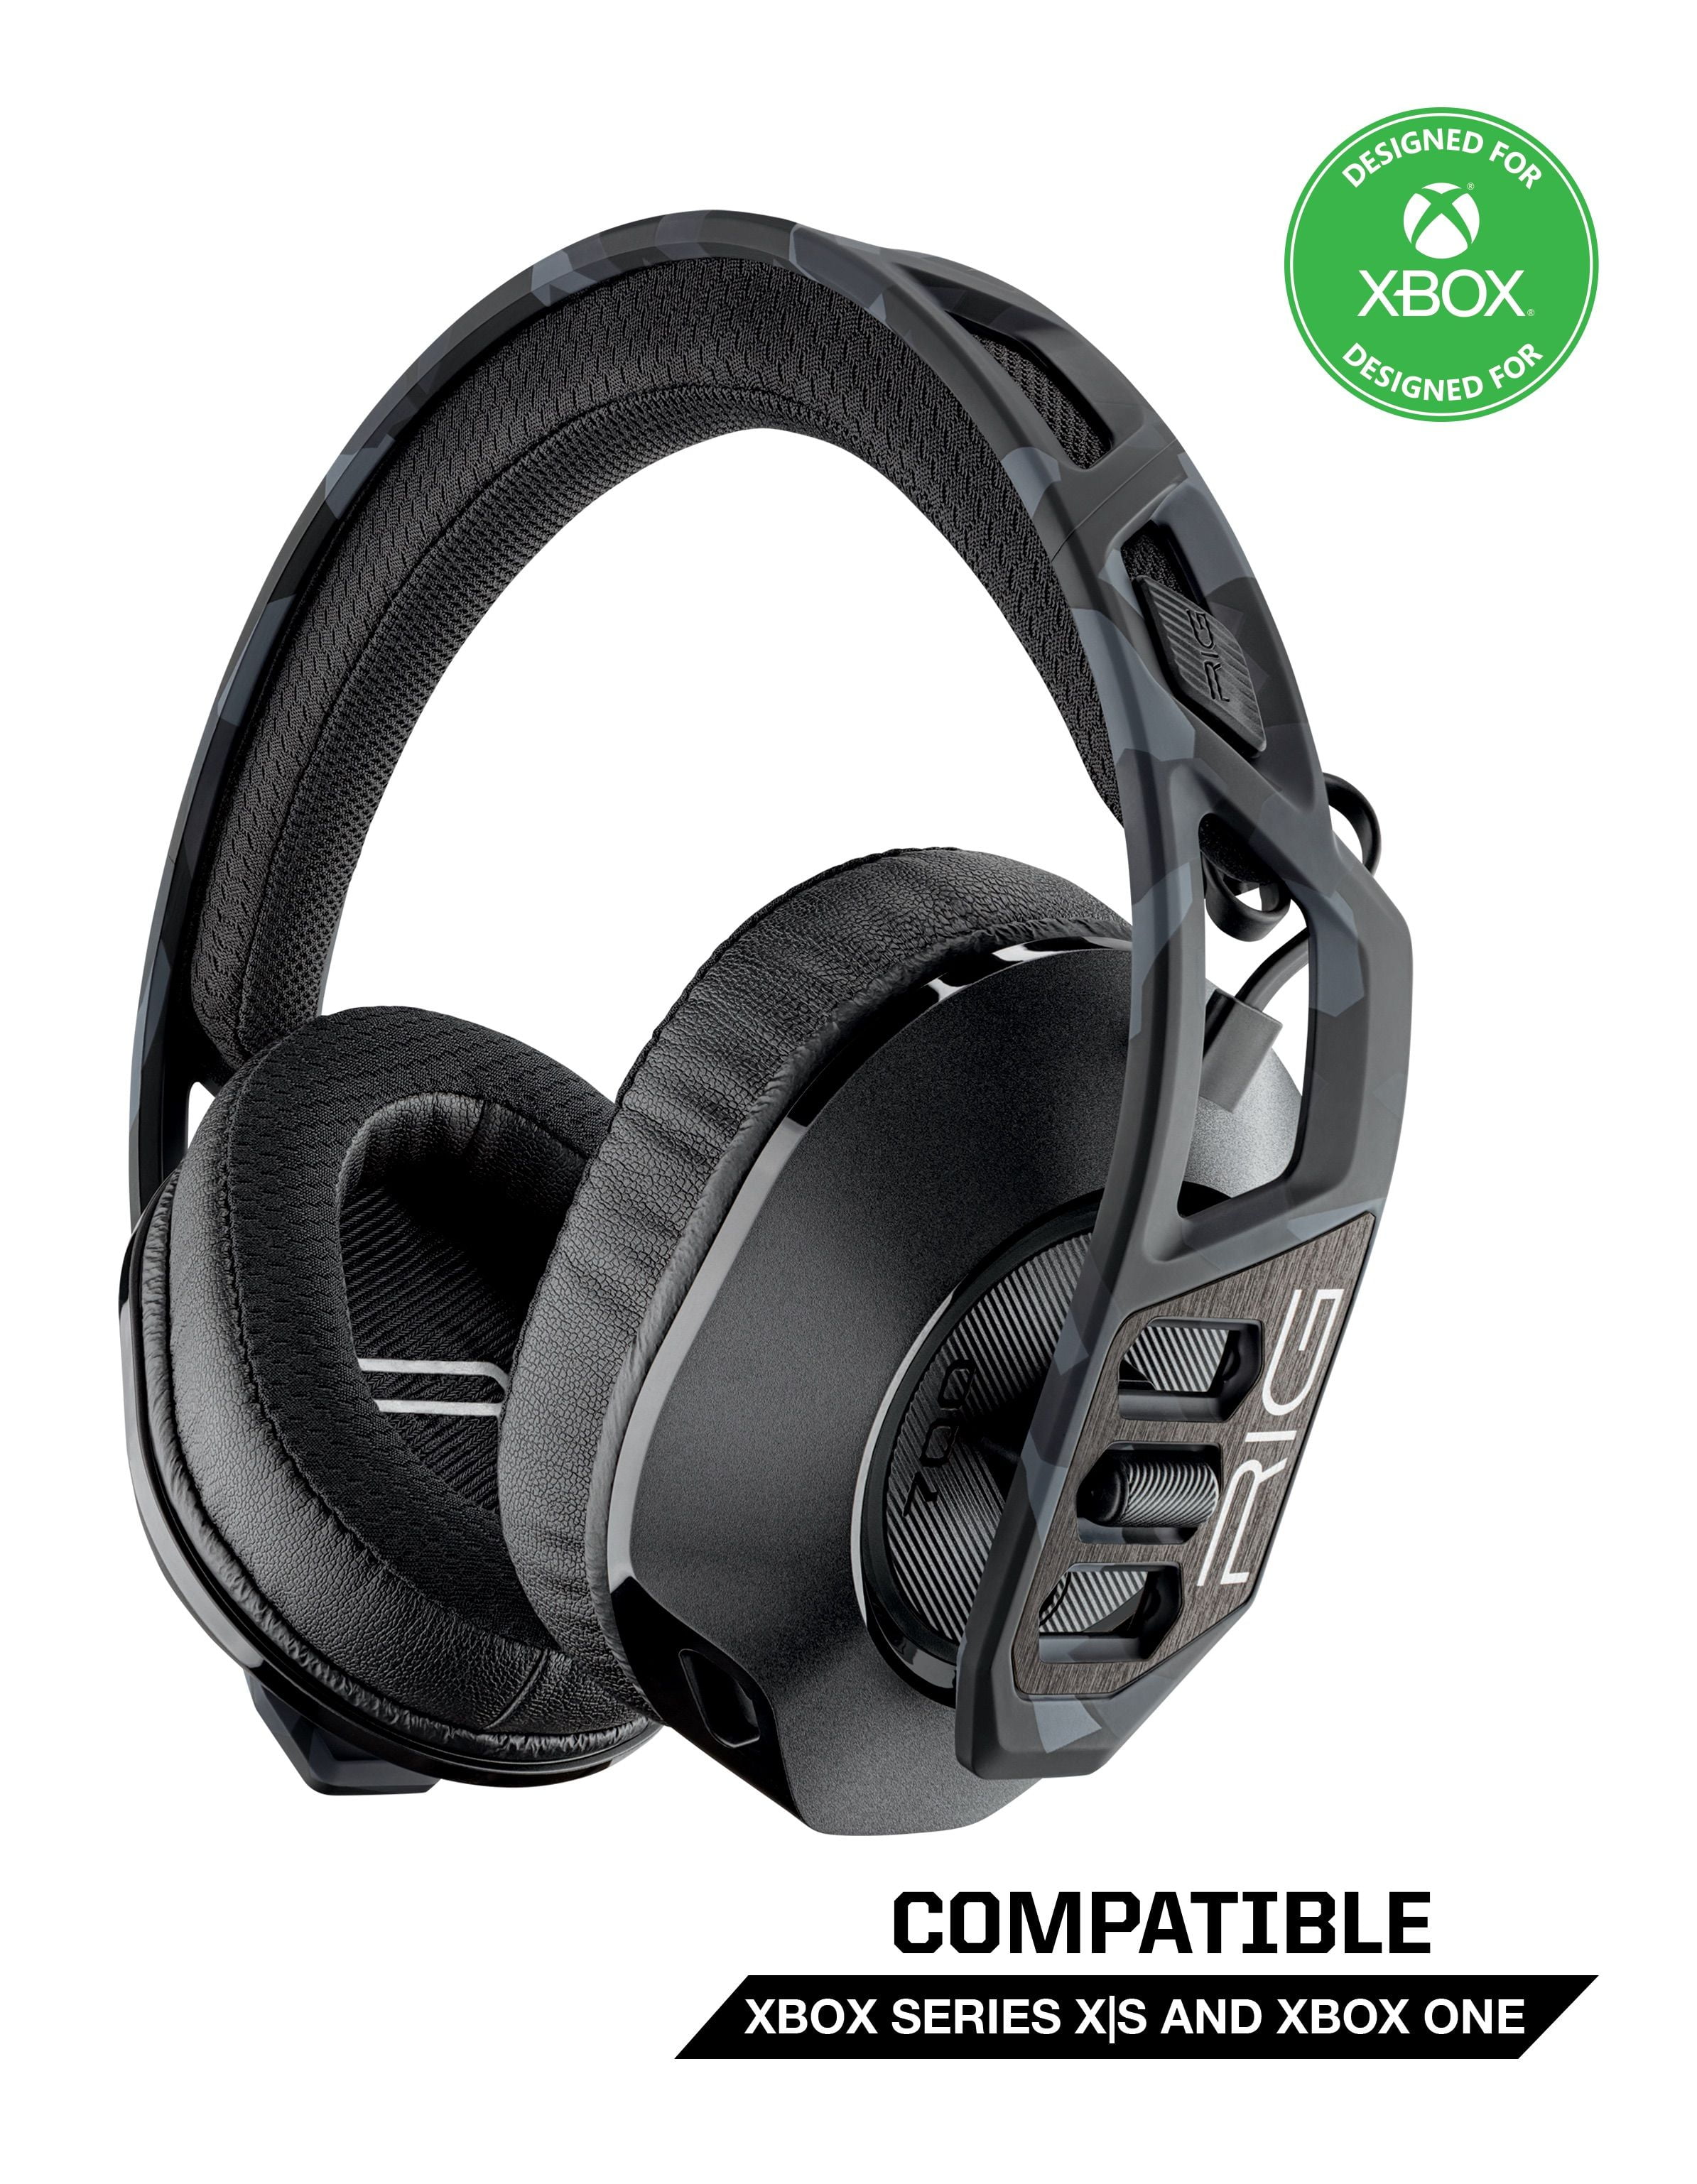 xbox one headset with dolby atmos